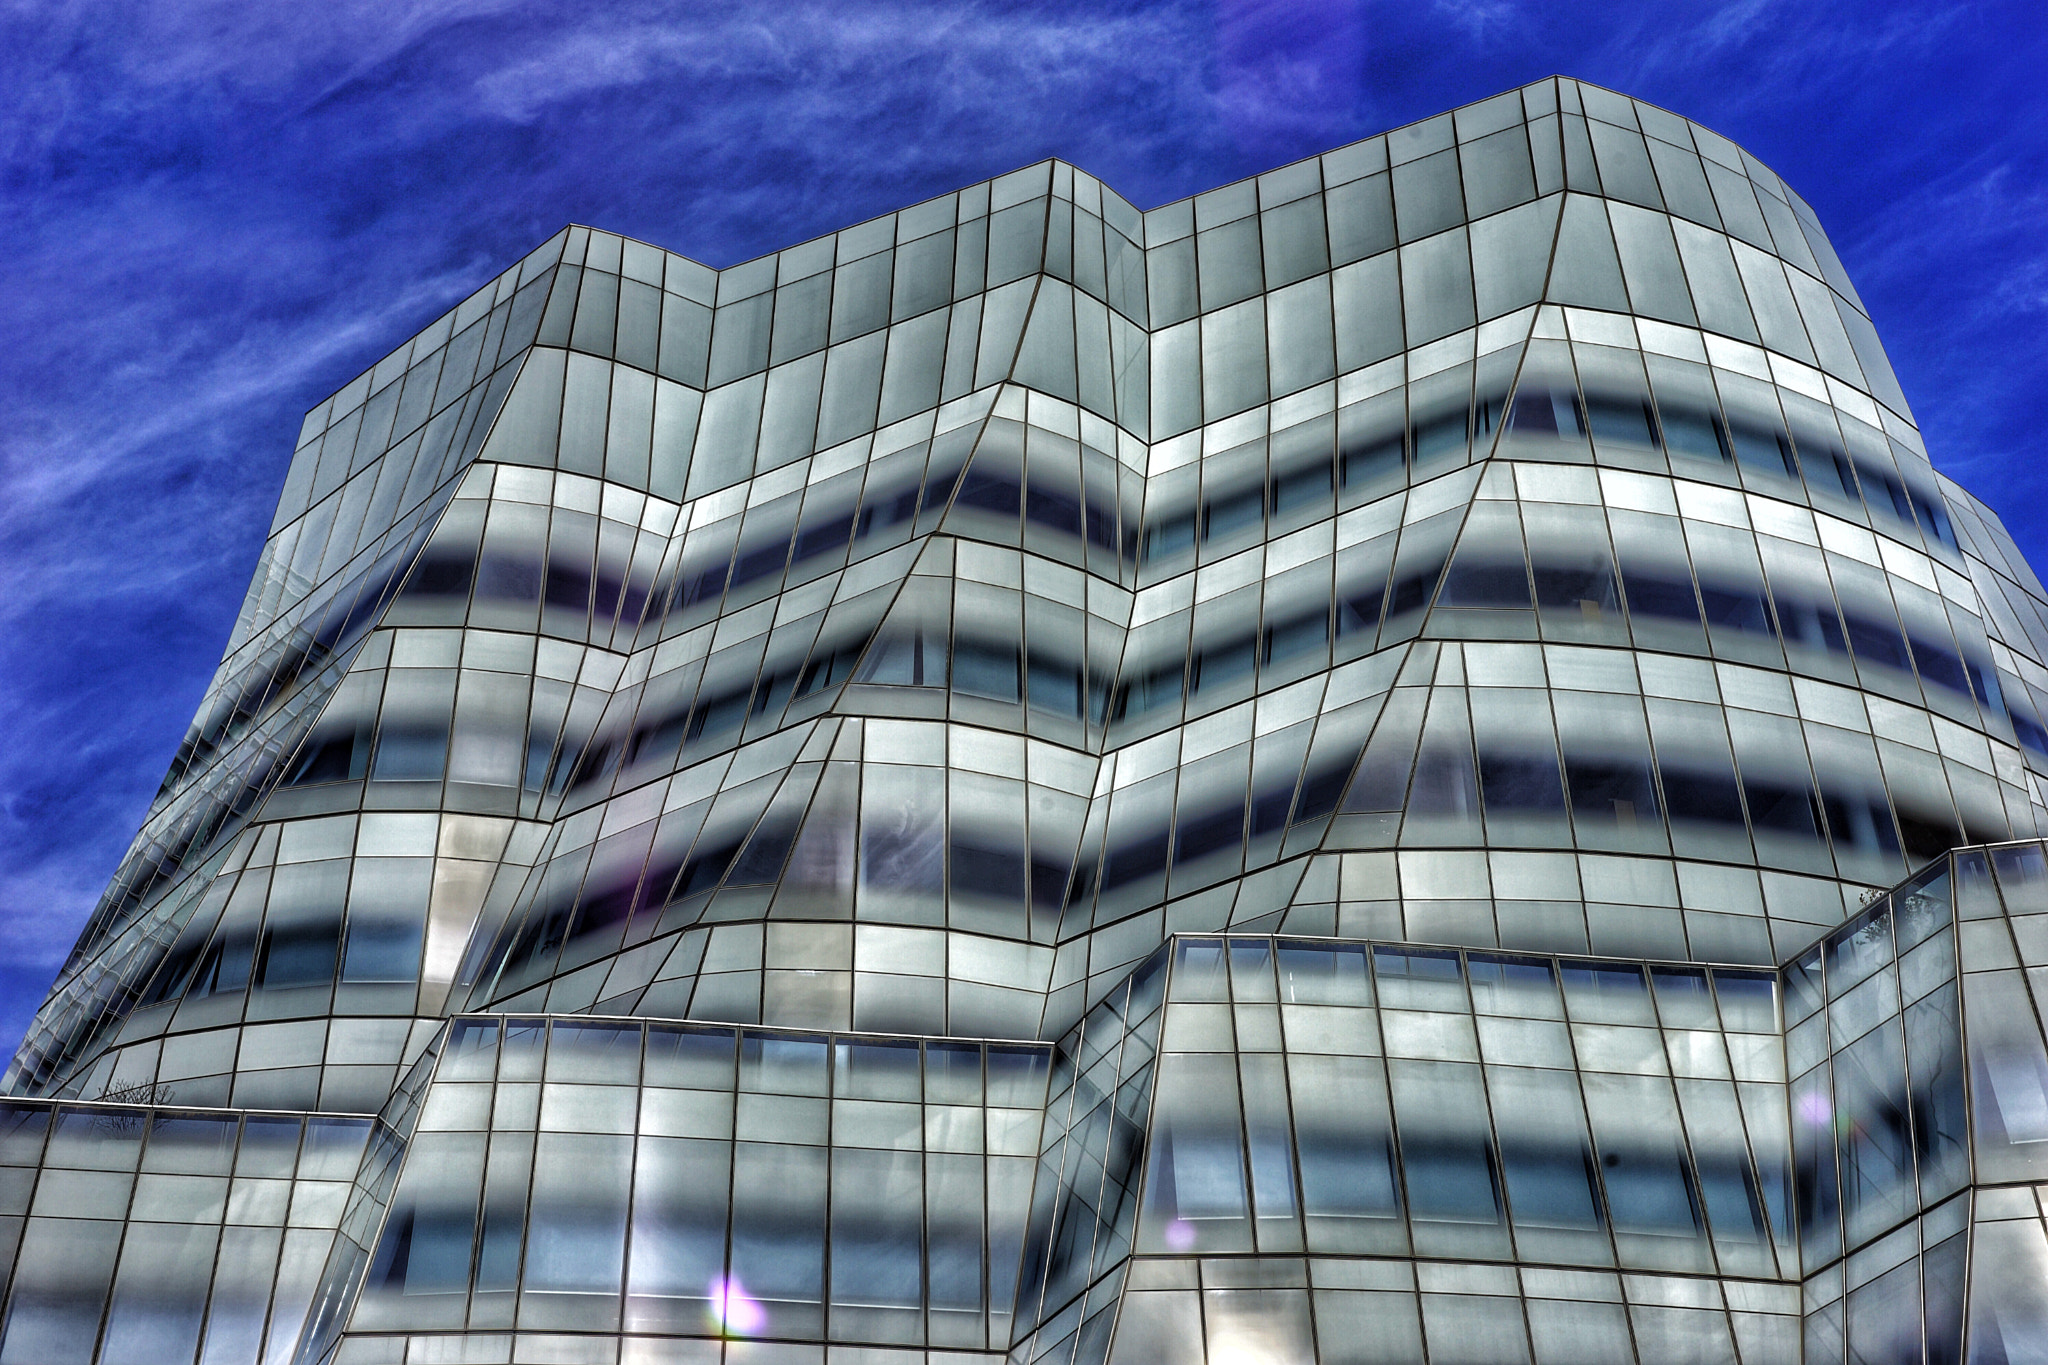 Hasselblad HV sample photo. Iac building frank gehry architect meatpacking district photography